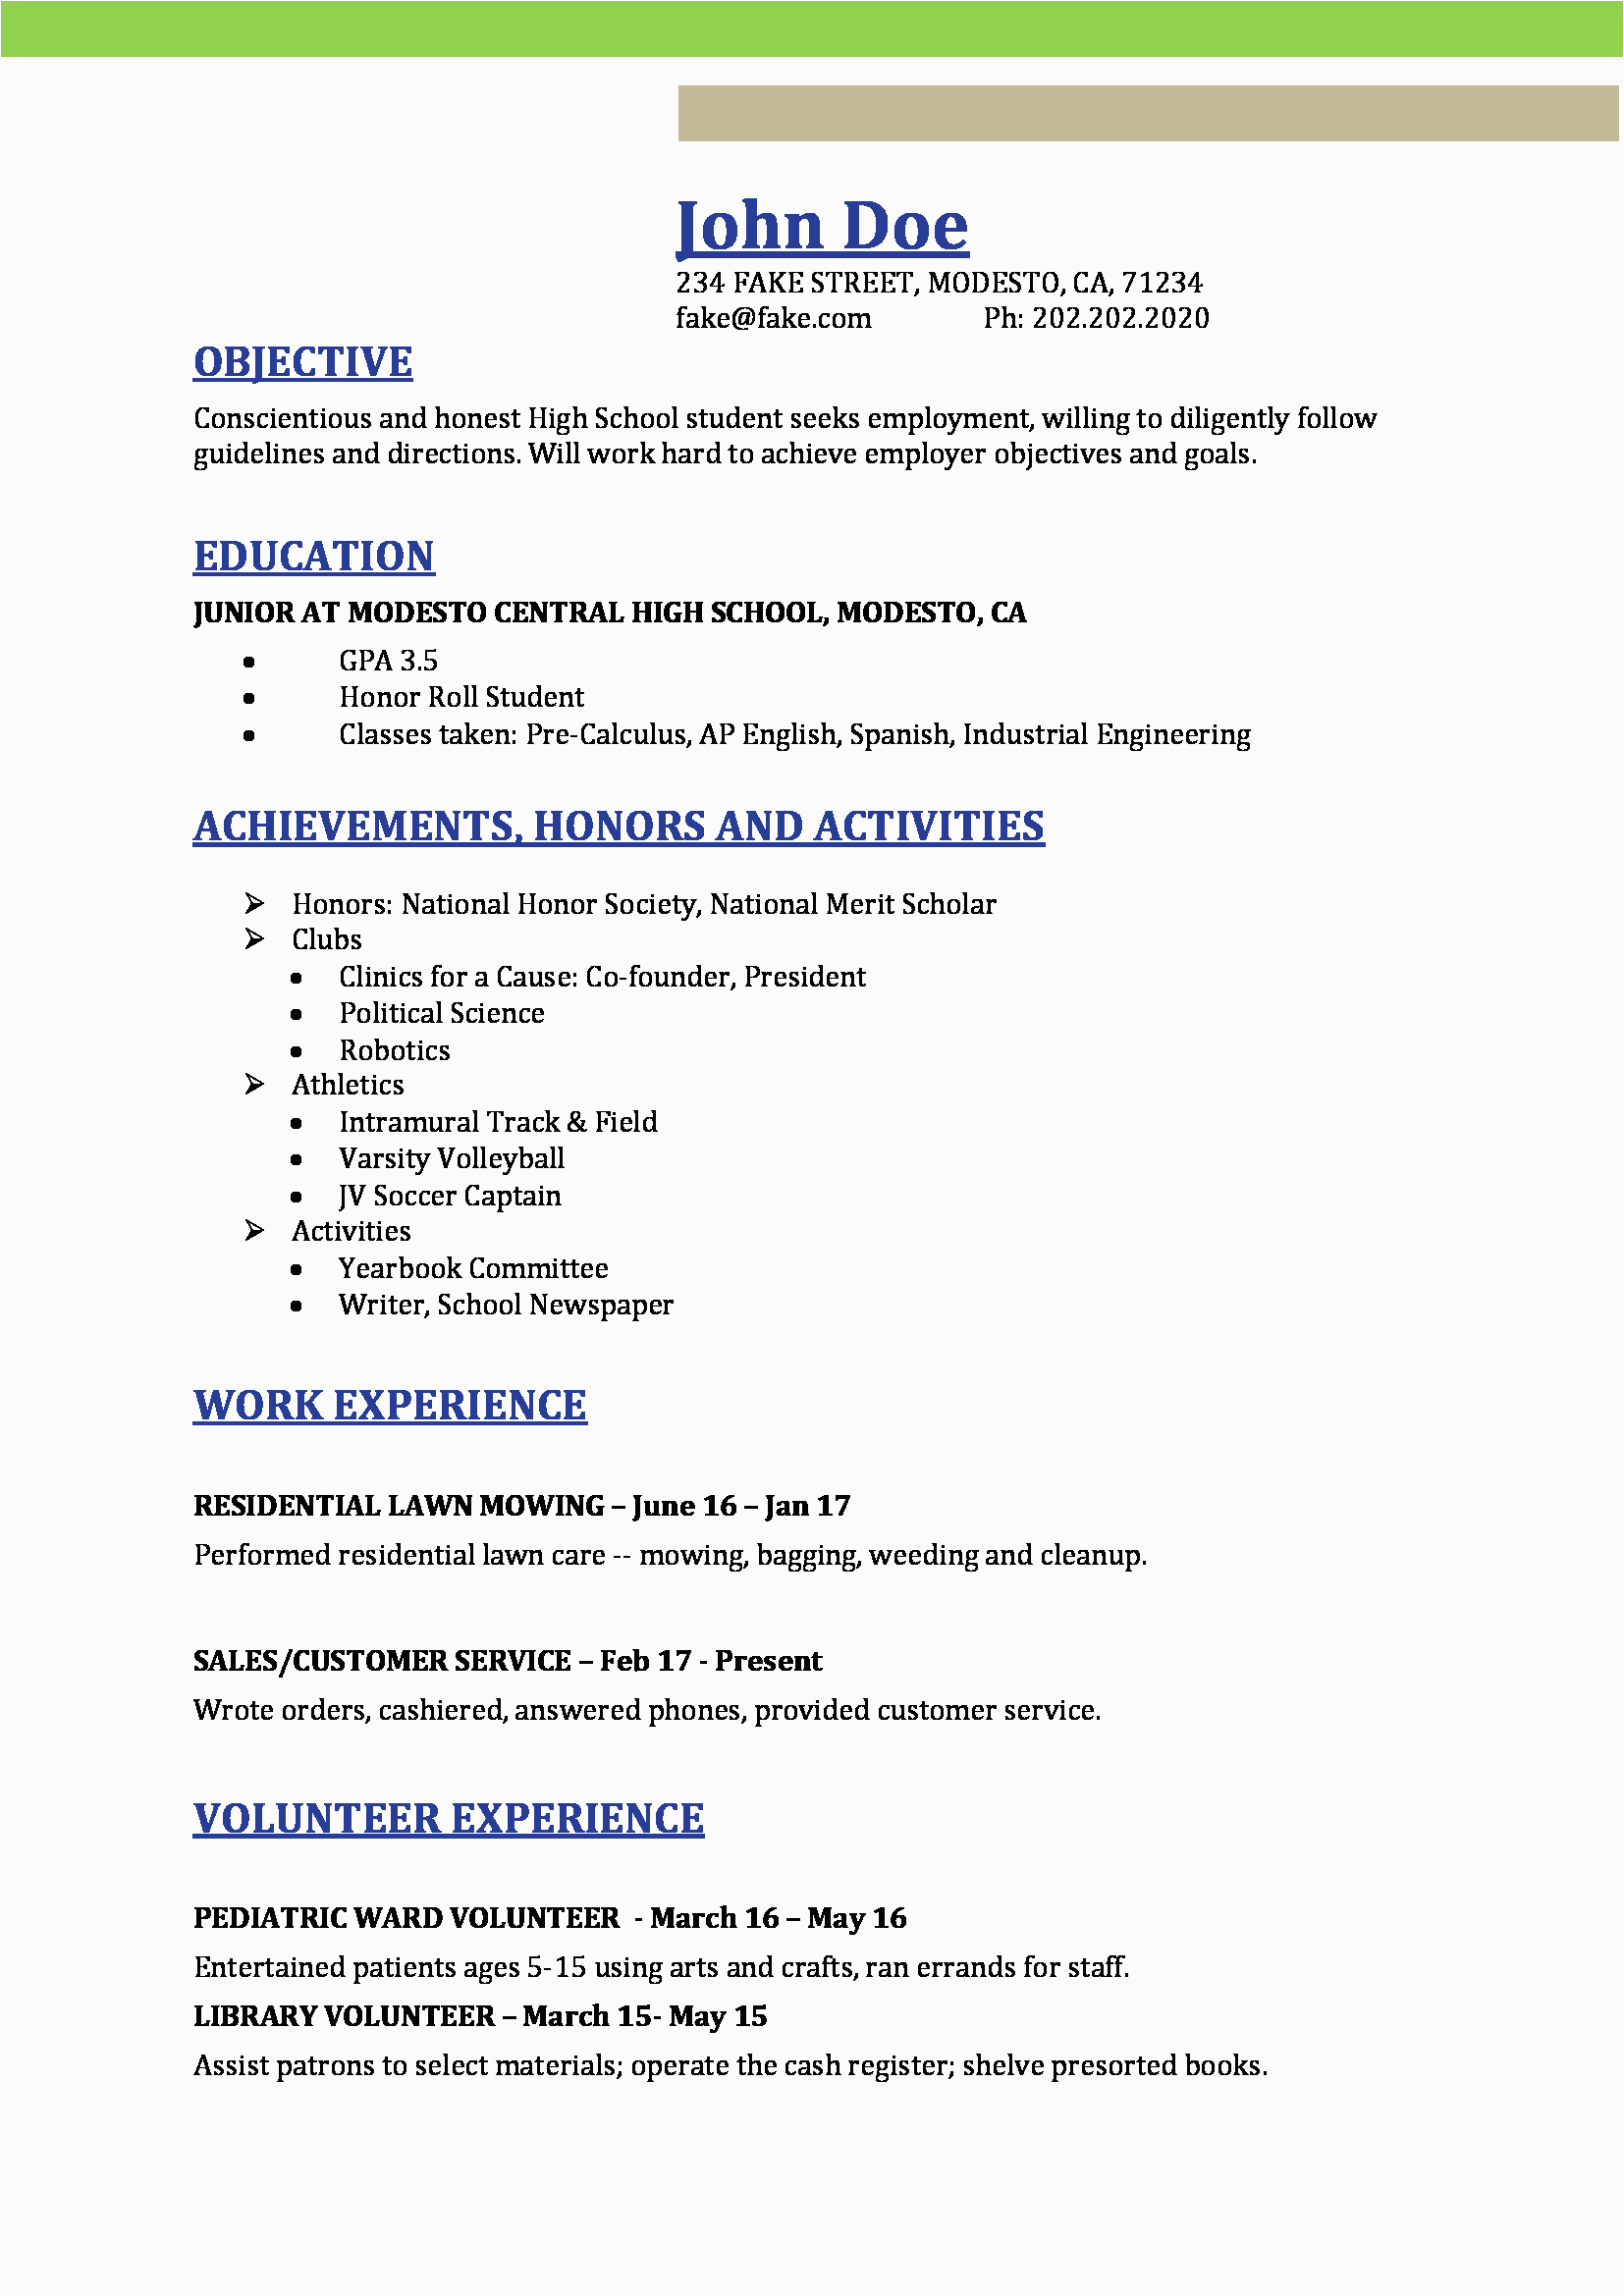 College Resume for High School Students Template High School Resume Resume Templates for High School